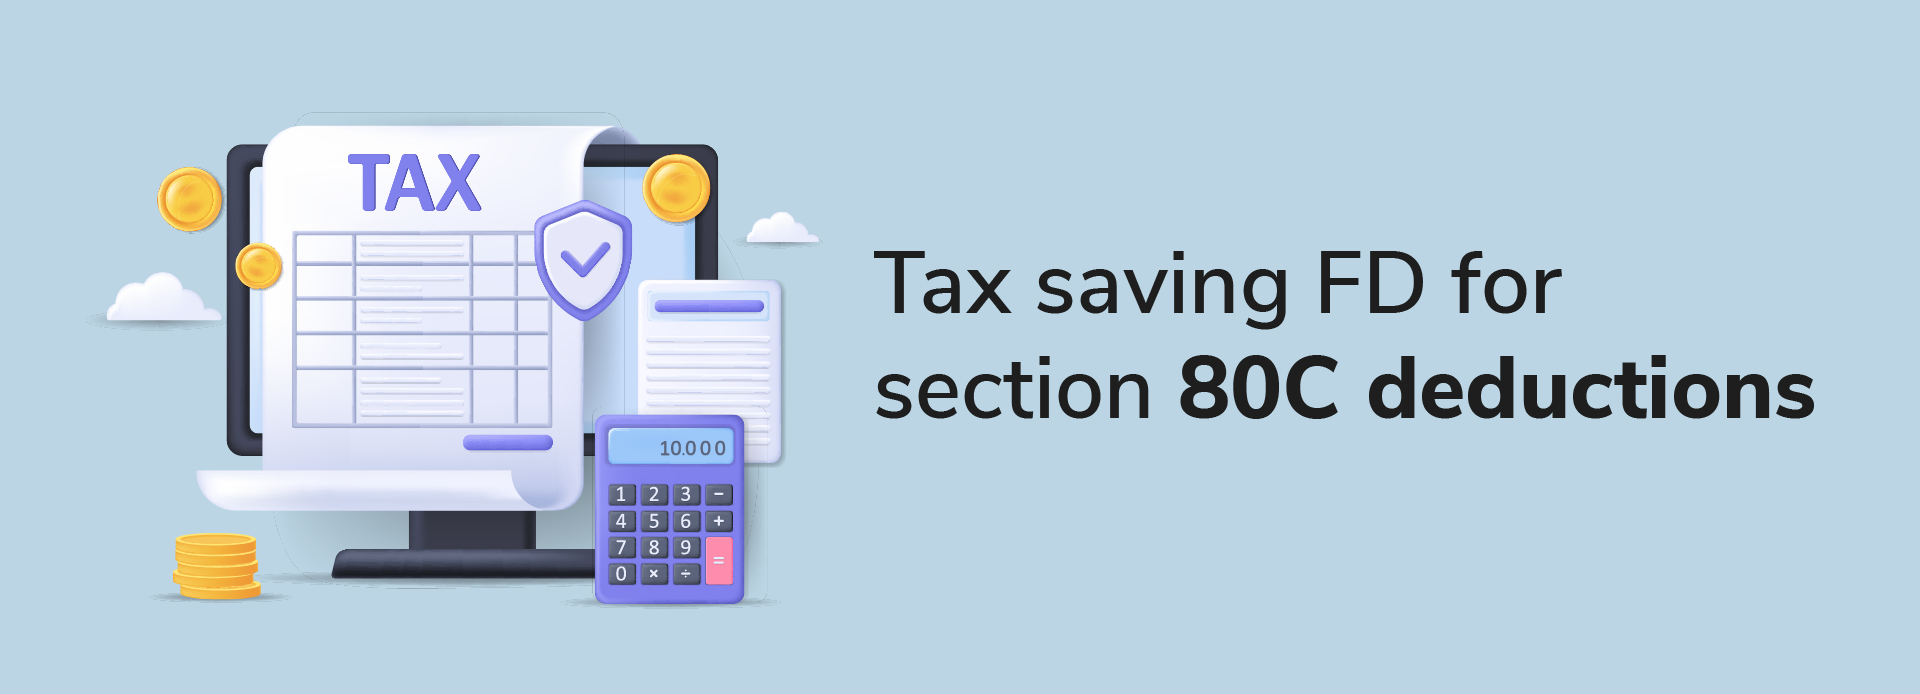 Tax saving FD for section 80C deductions: Benefits, interest rates, risks, and limits 